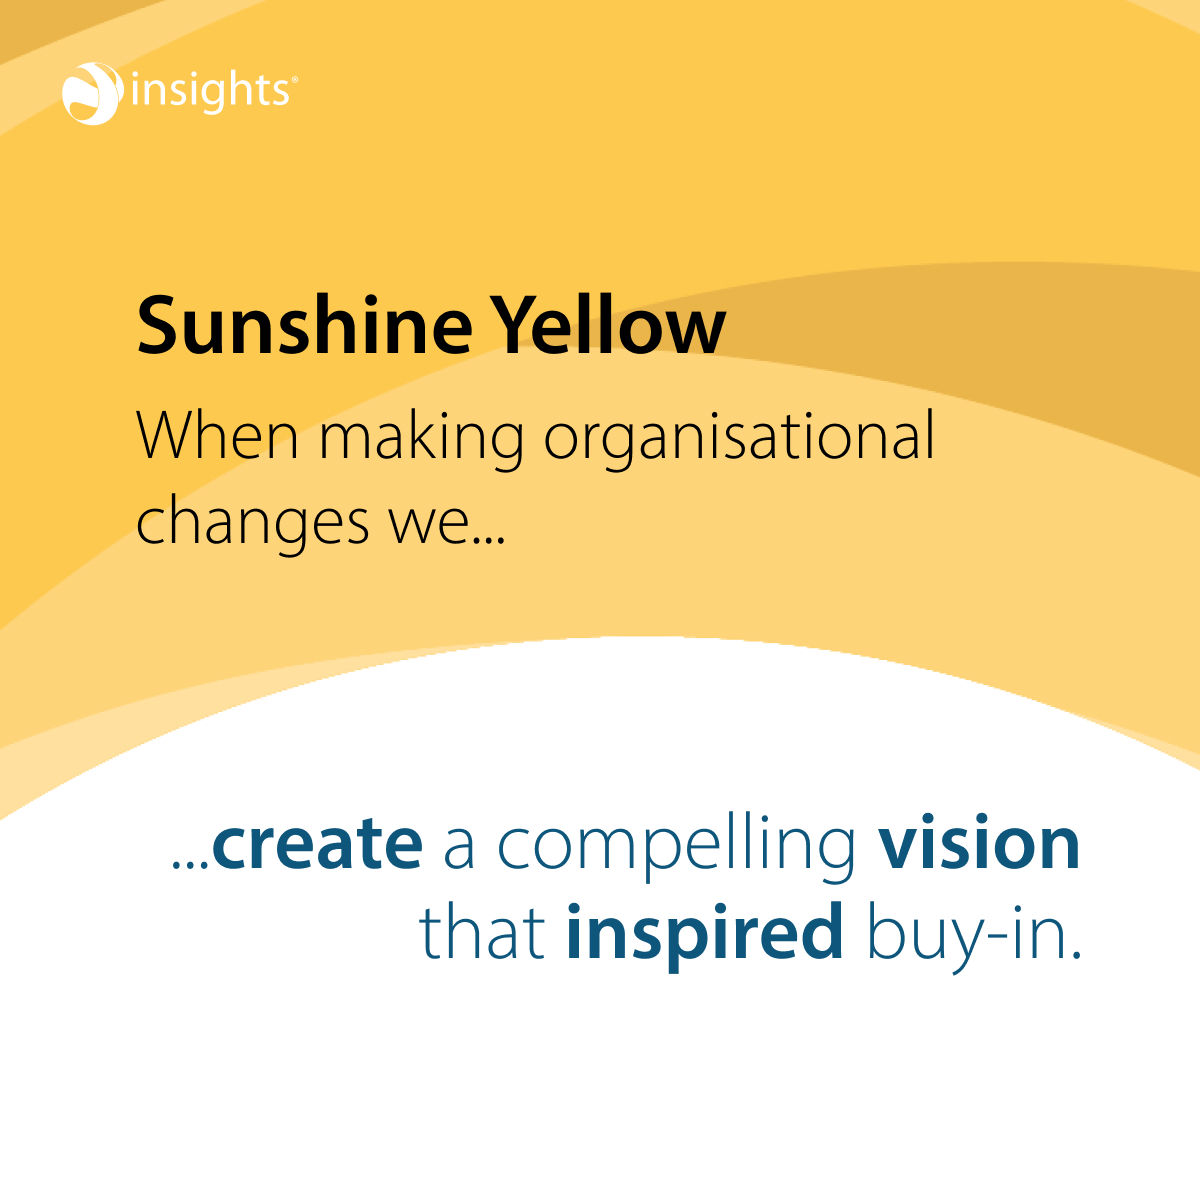 Implementing #OrganisationalChange can be a challenge, but it's possible with the right approach! Understanding the org & culture, meeting employee needs, and having a diverse team can help ensure positive change. Learn more:
insights.com/solutions/chan…

#ColourEnergies #Insights